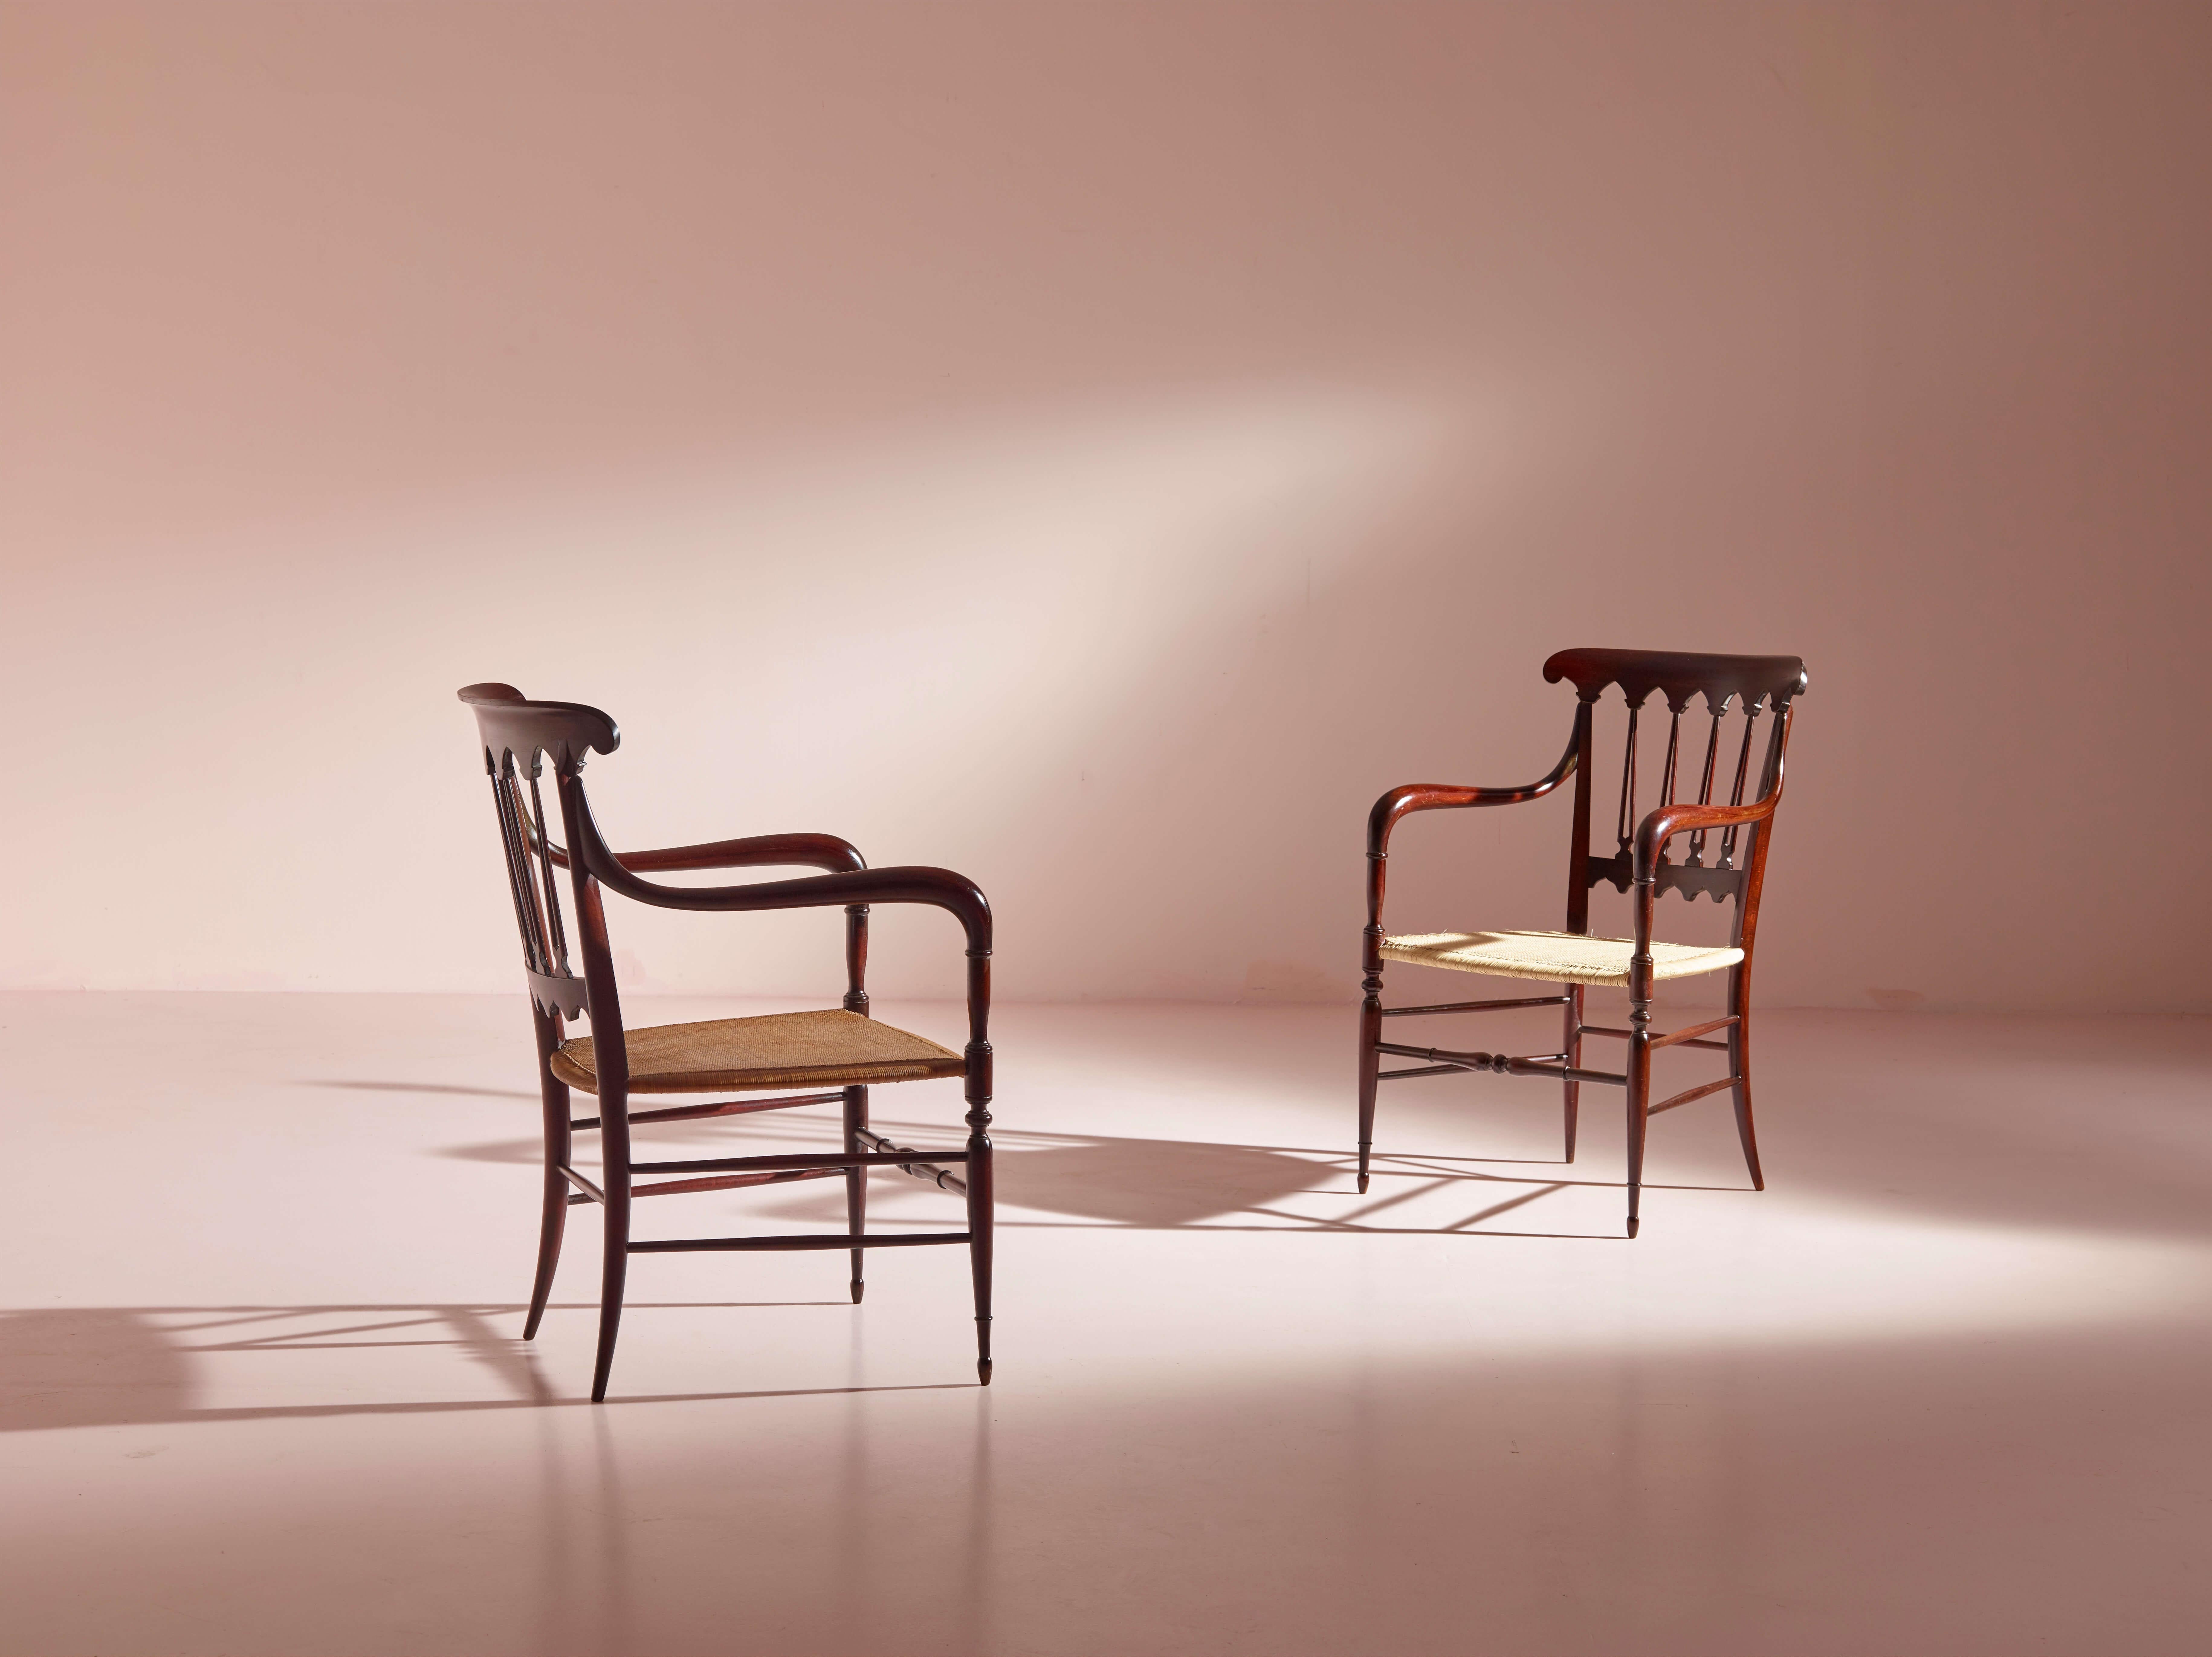 An elegant set of armchairs, crafted by Colombo Sanguineti in Italy during the 1950s, exemplifies the exceptional artistry of the Chiavari cabinetmaker's artisanal skills.

Renowned as the 